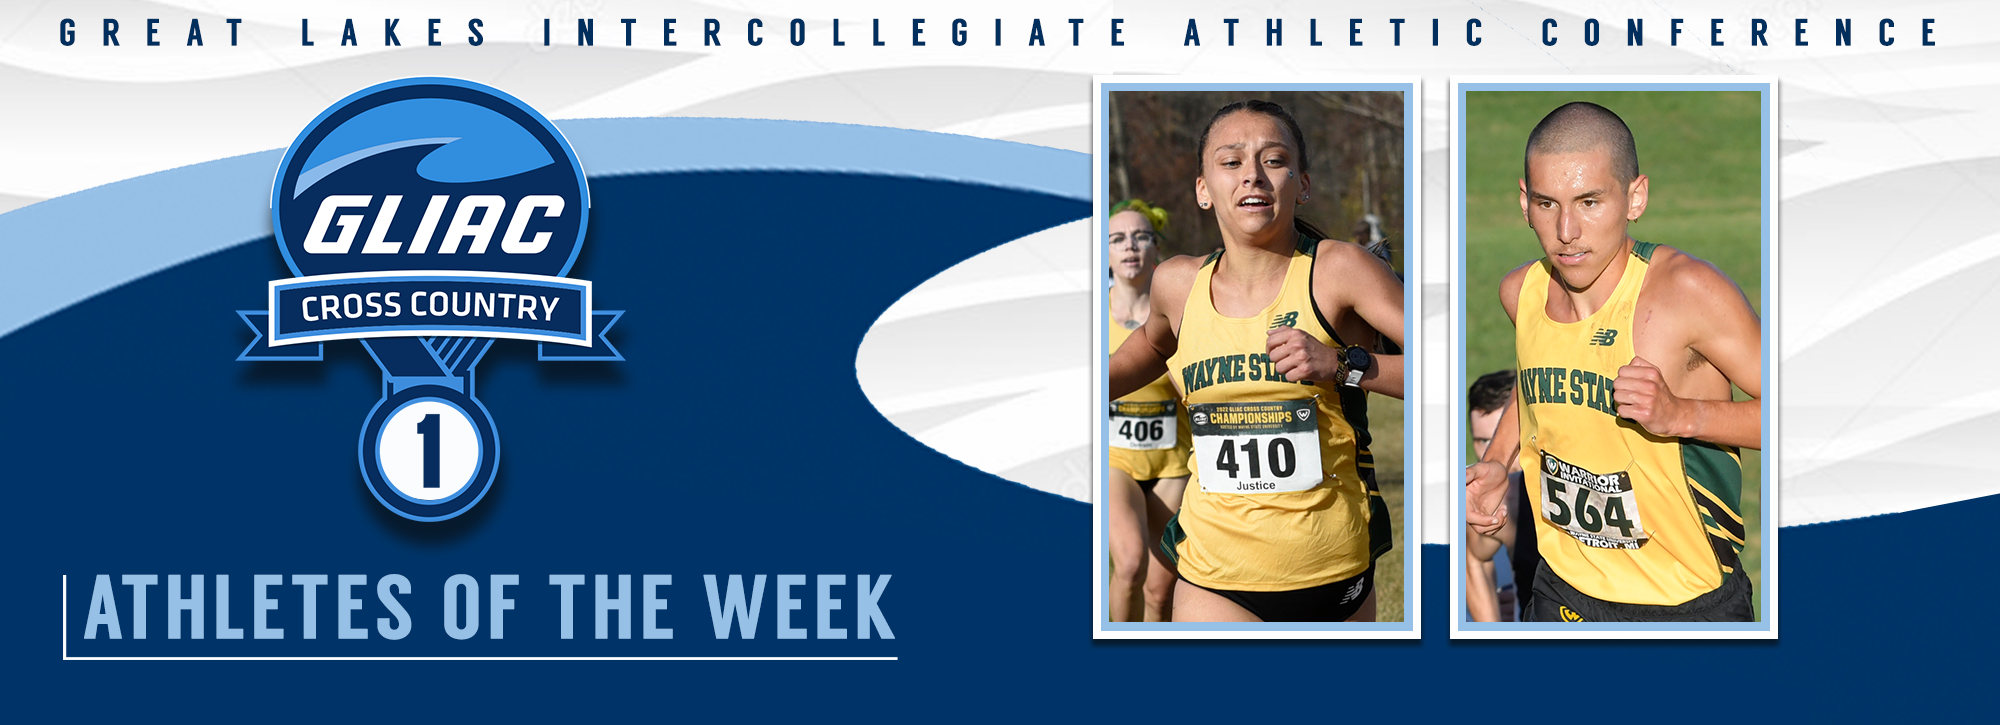 Wayne State's Justice and Truman earn GLIAC weekly cross country honors